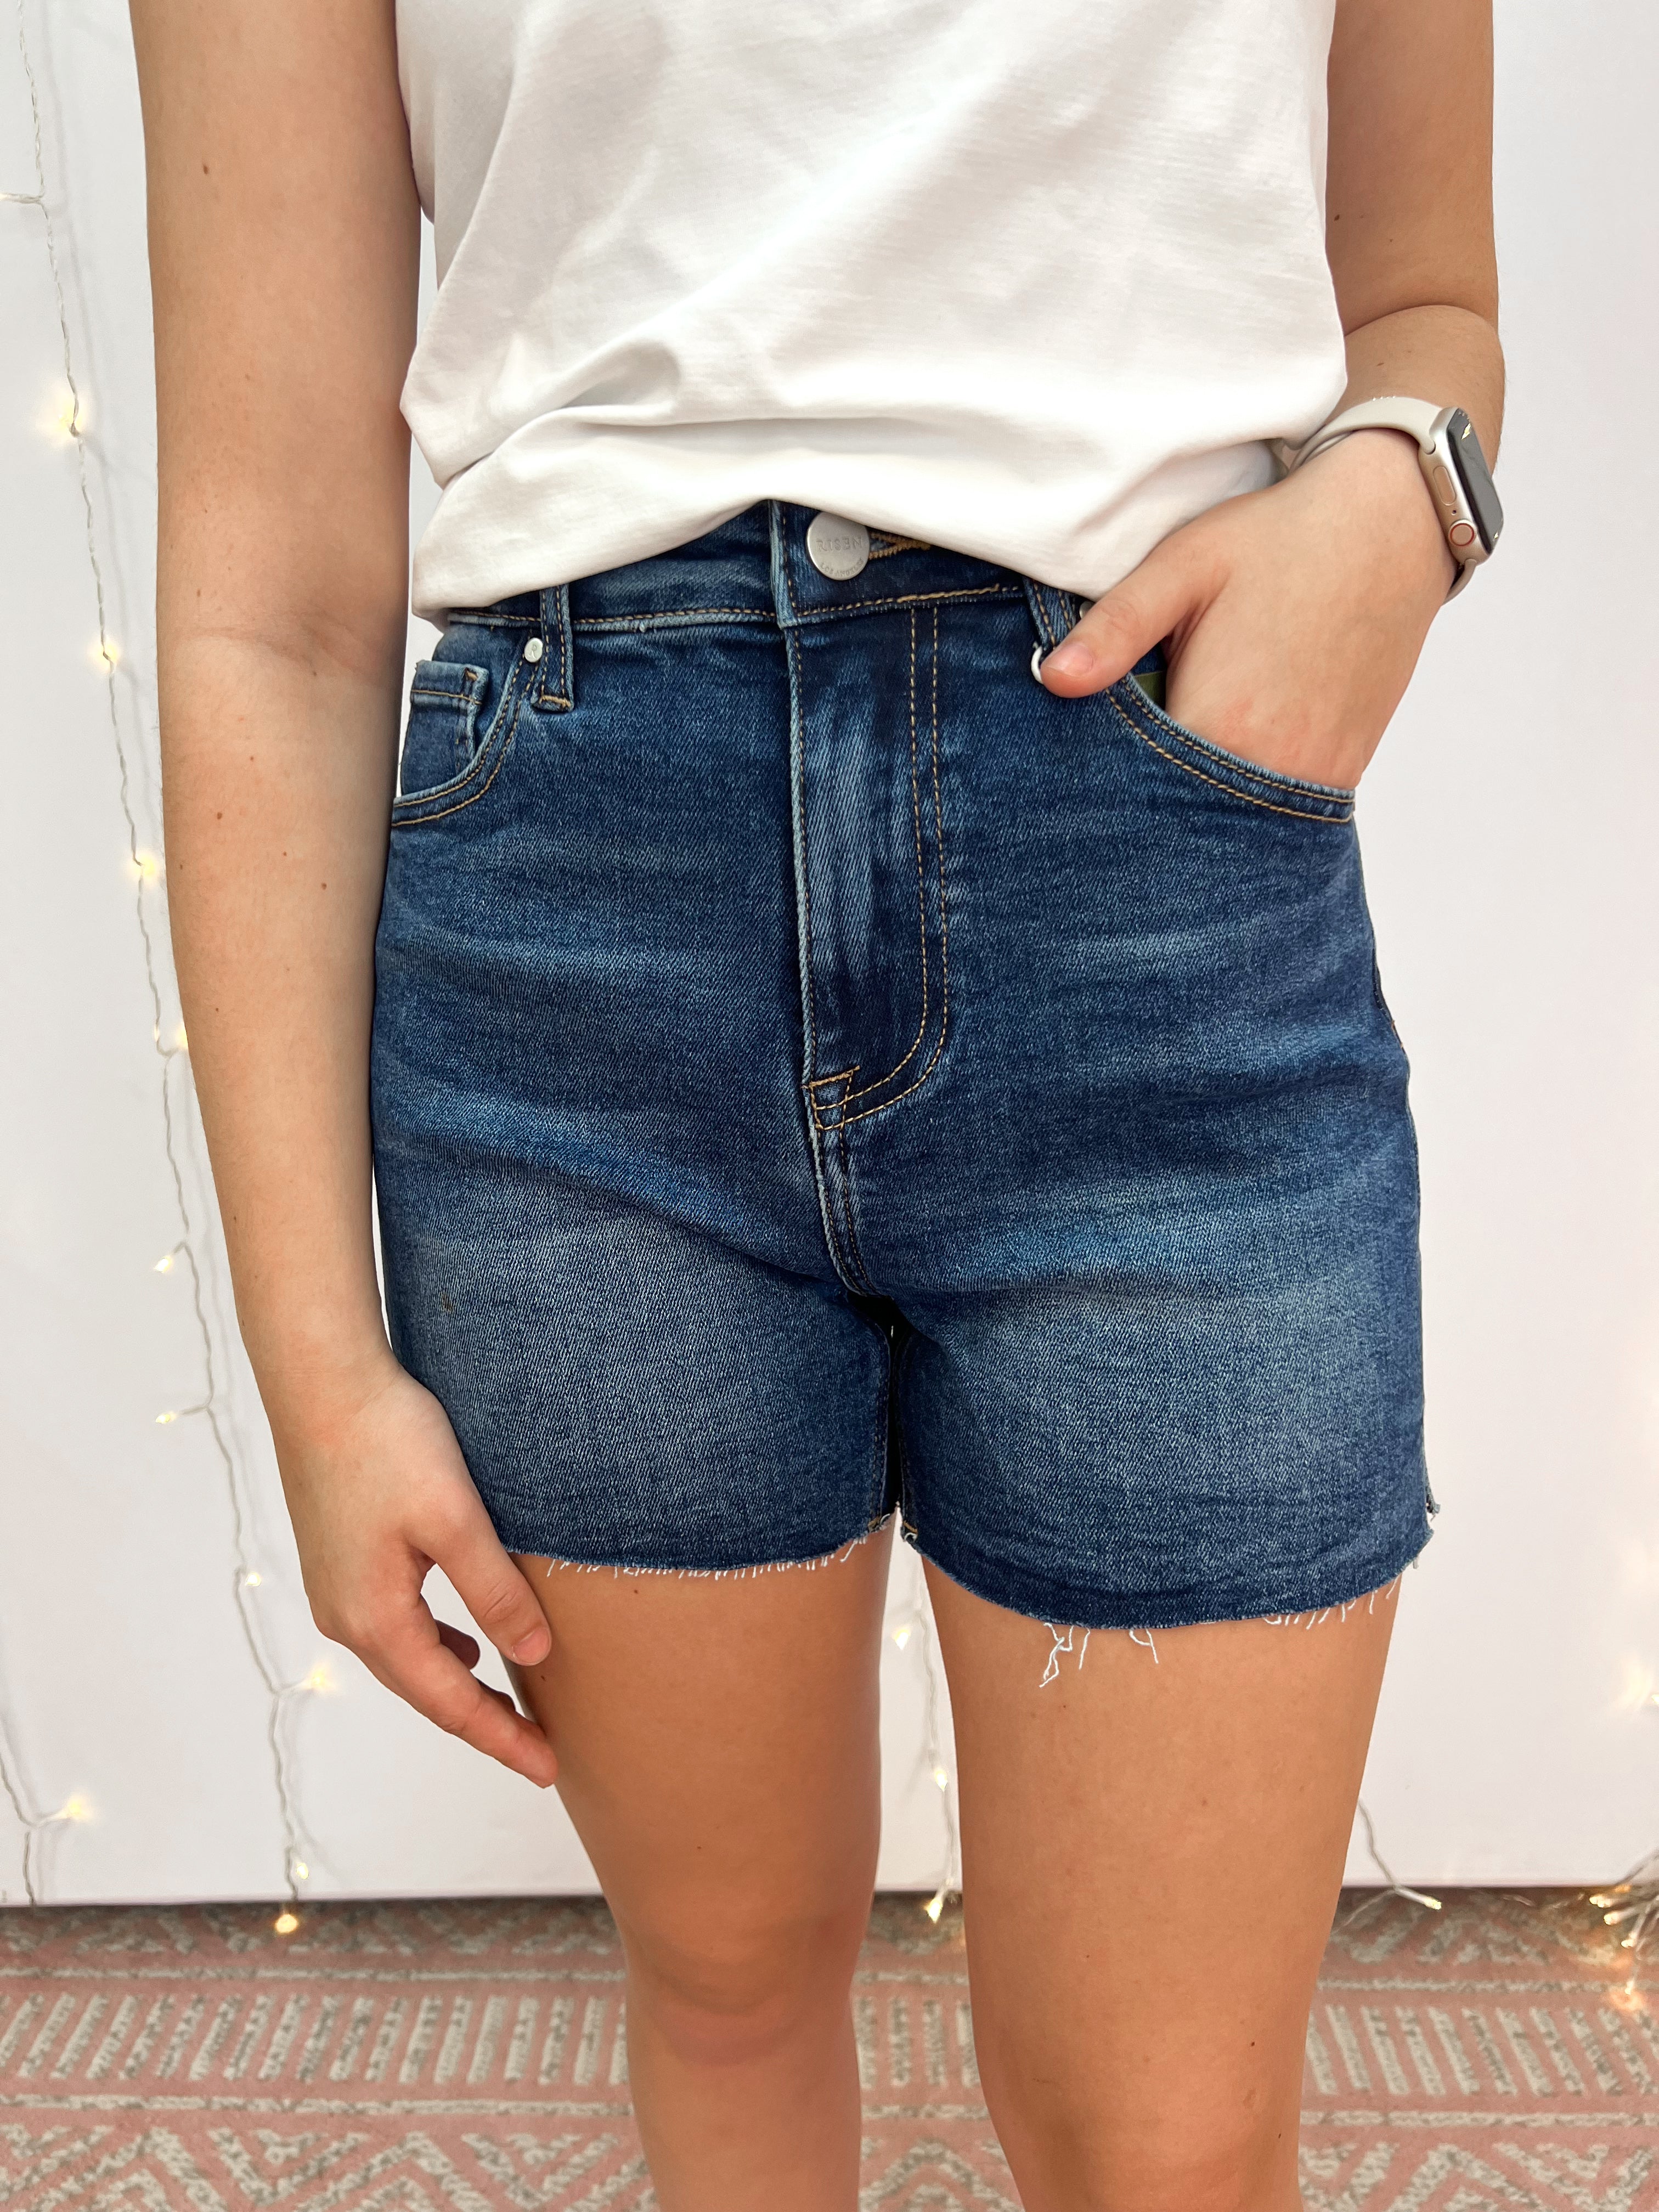 Risen Jeans High Rise Distressed Mid Thigh Shorts